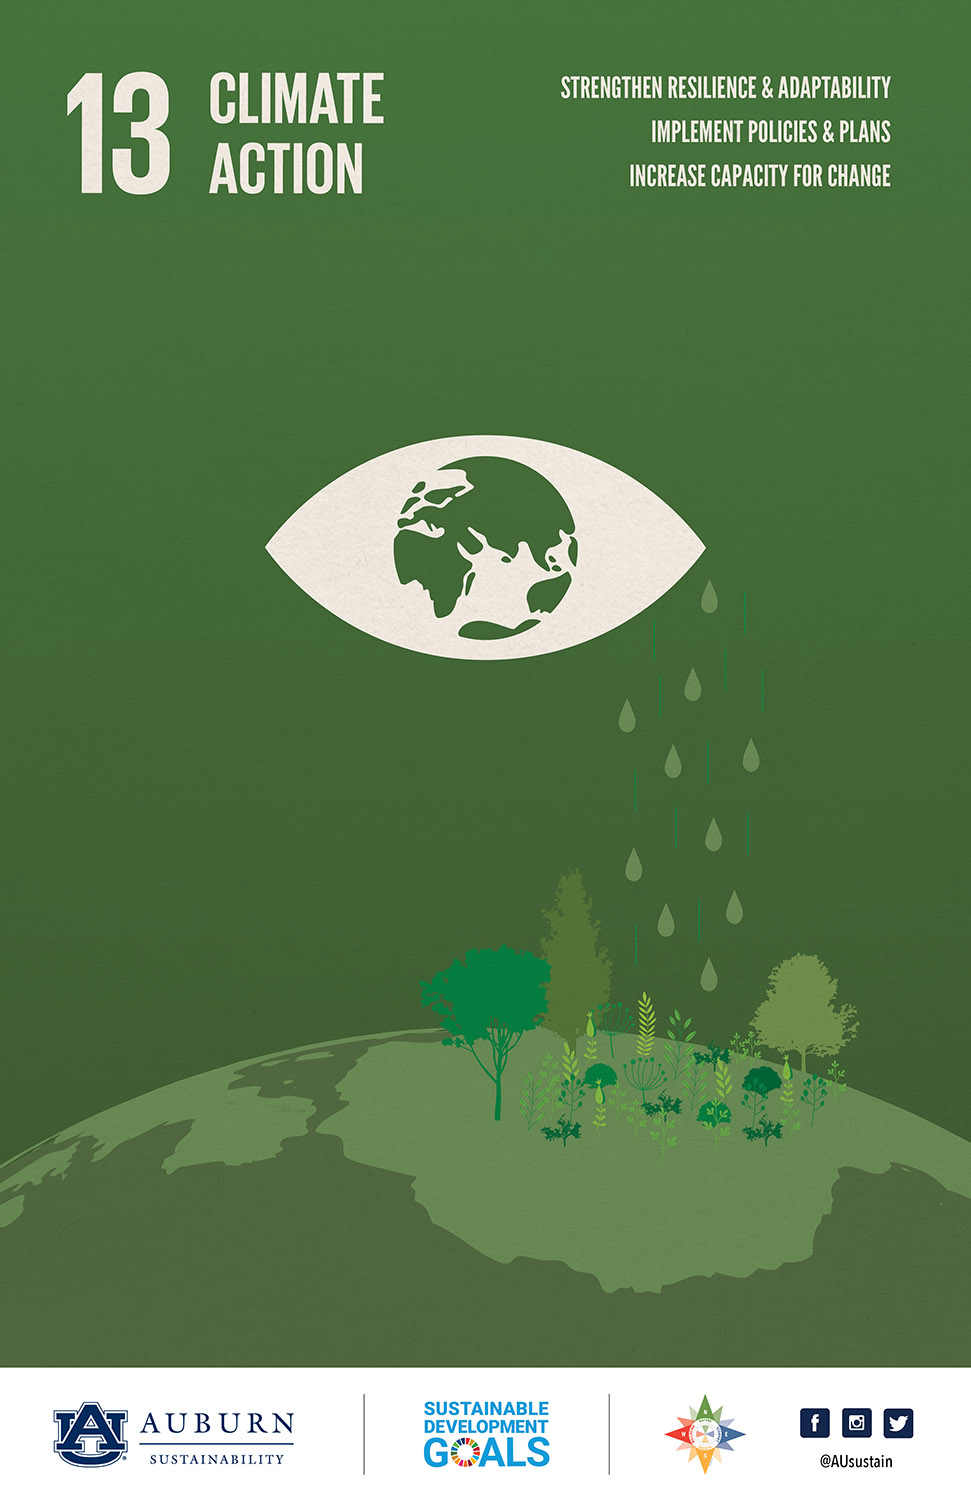 Sustainable Development Goal 13 Poster illustration: Climate Action. Goals include: Strengthen resilience & adaptability, implement policies & plans, and increase capacity for change.